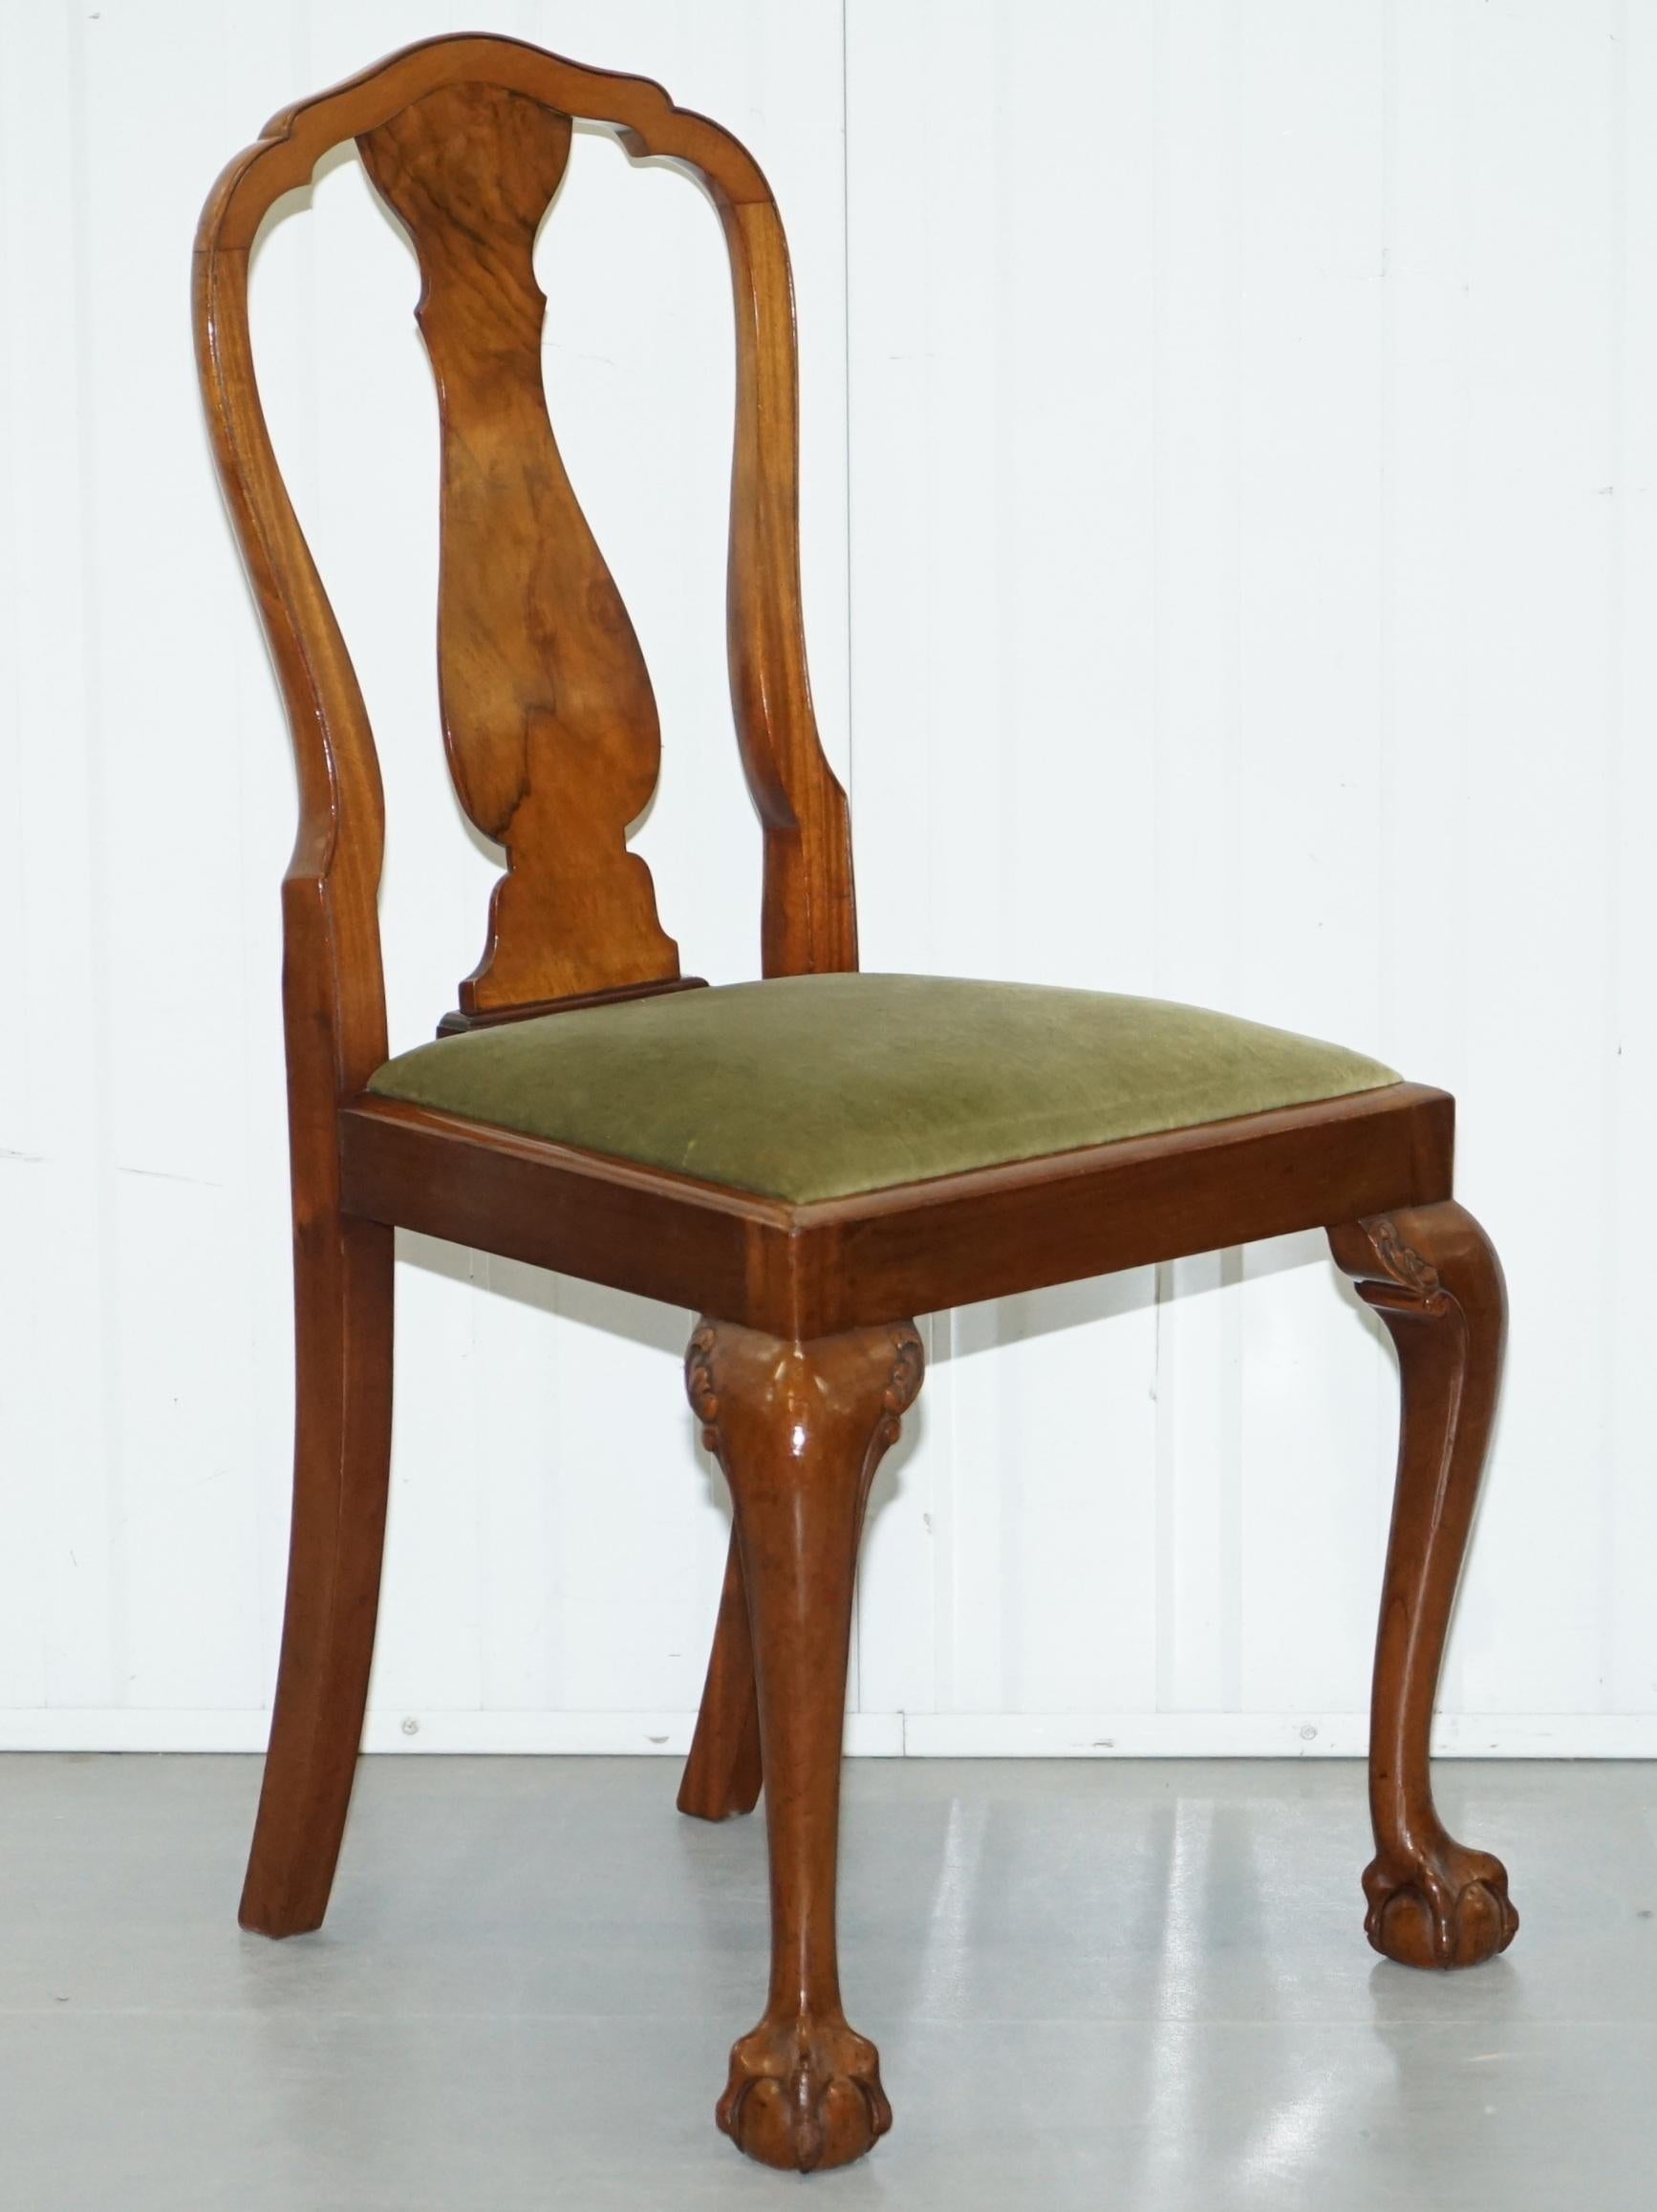 We are delighted to offer for sale this lovely set of four solid Walnut dining chairs with Thomas Chippendale style claw & ball feet, circa 1940s

A very good looking and decorative set of chairs, the legs are nicely carved with early Georgian